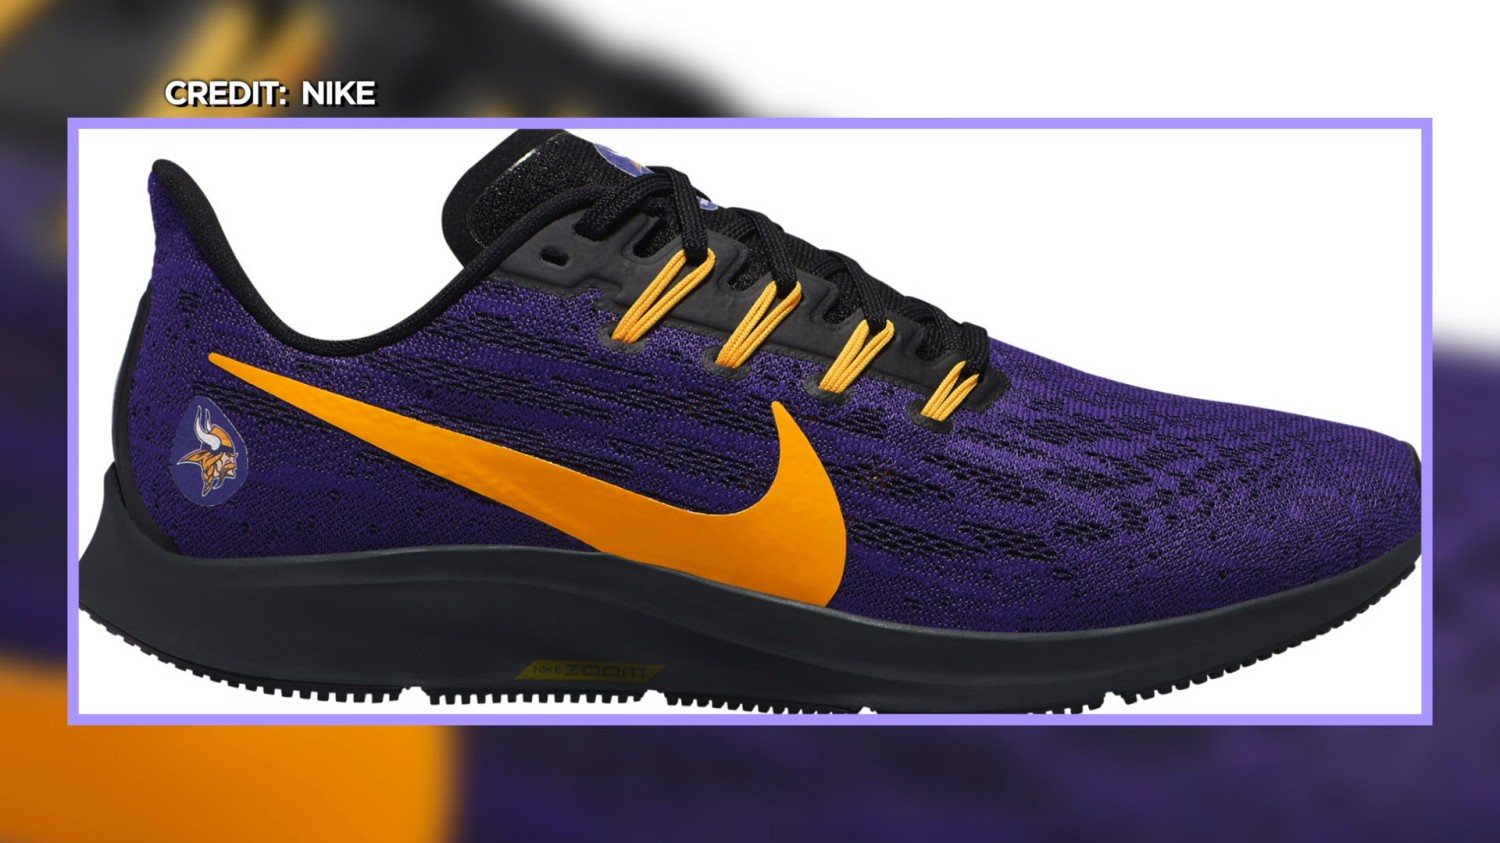 Limited Edition VikingsThemed Nikes Now Available